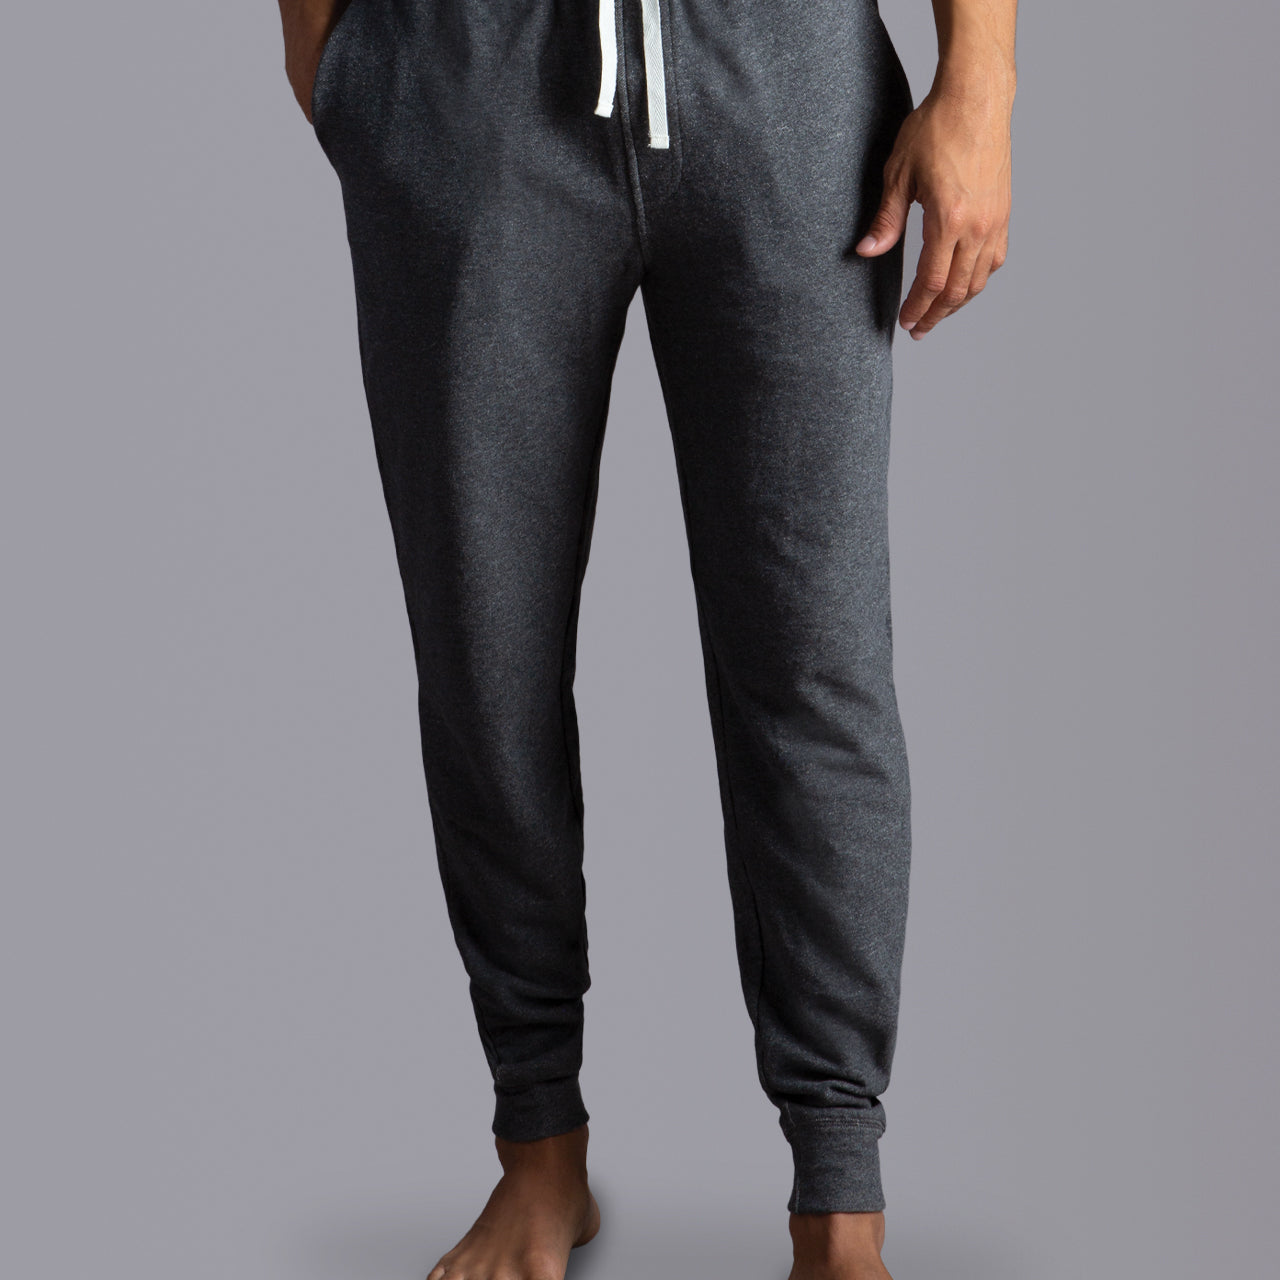 French Terry Lounge Pant